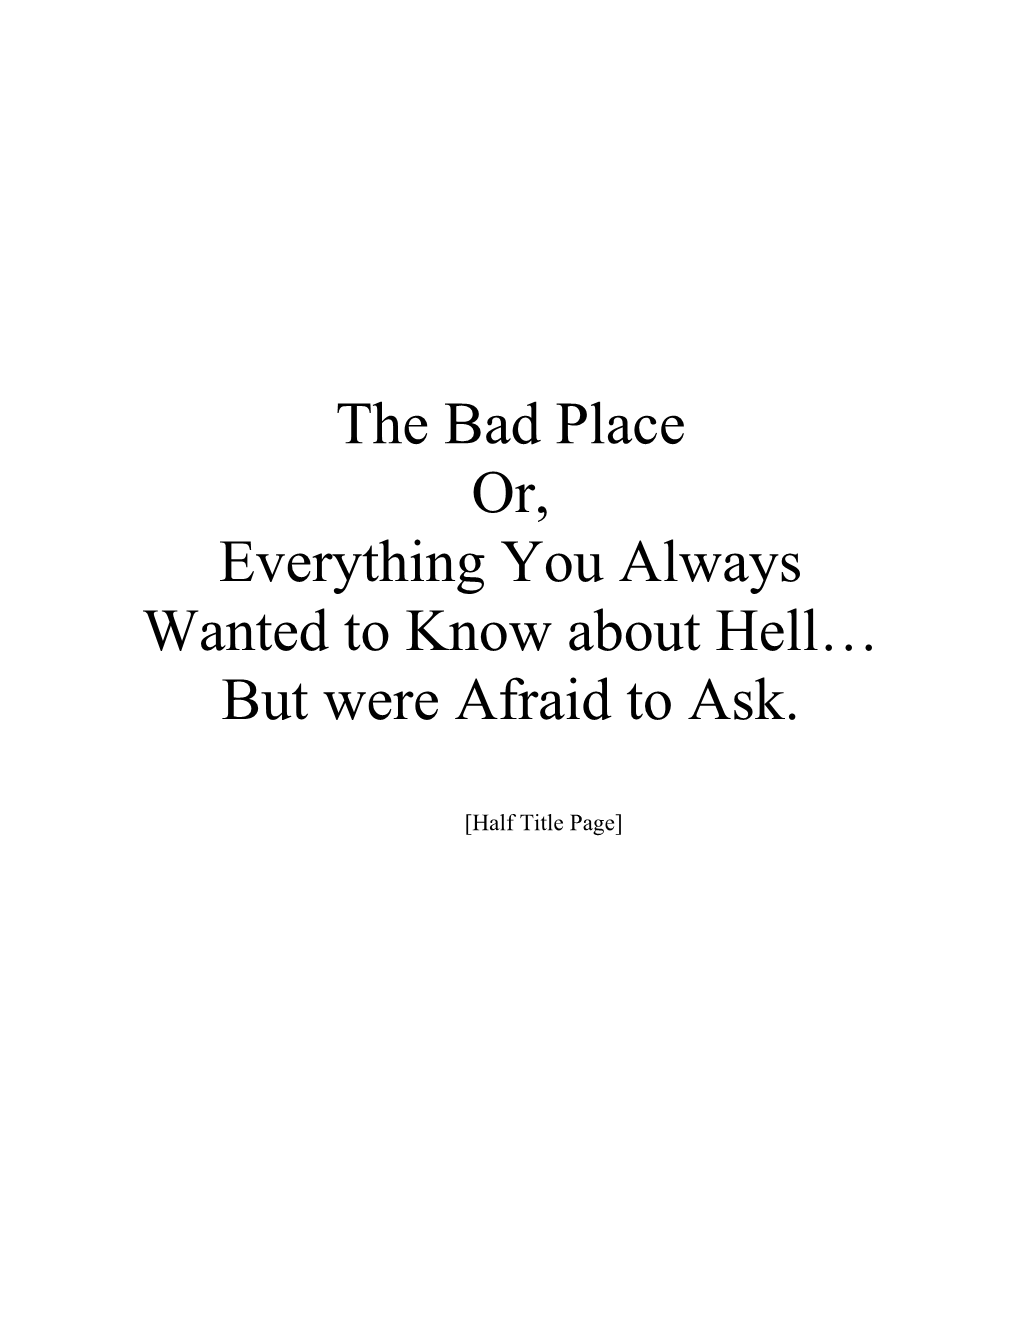 The Bad Place Or, Everything You Always Wanted to Know About Hell… but Were Afraid to Ask